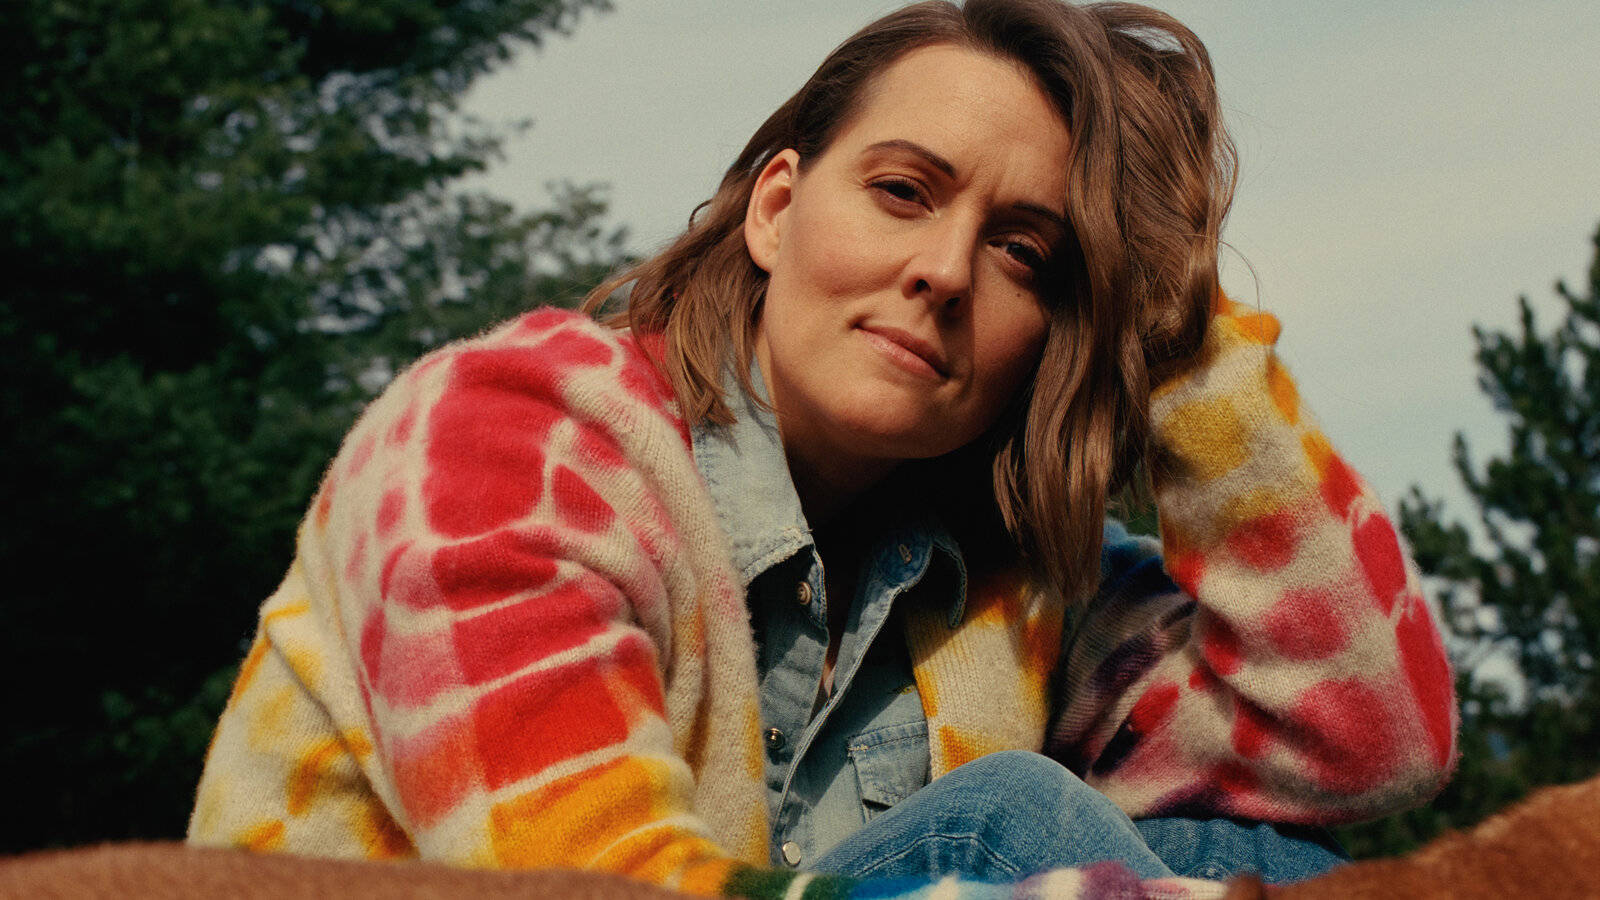 Brandi Carlile Looking Captivating in a Tie-dyed Shirt Wallpaper